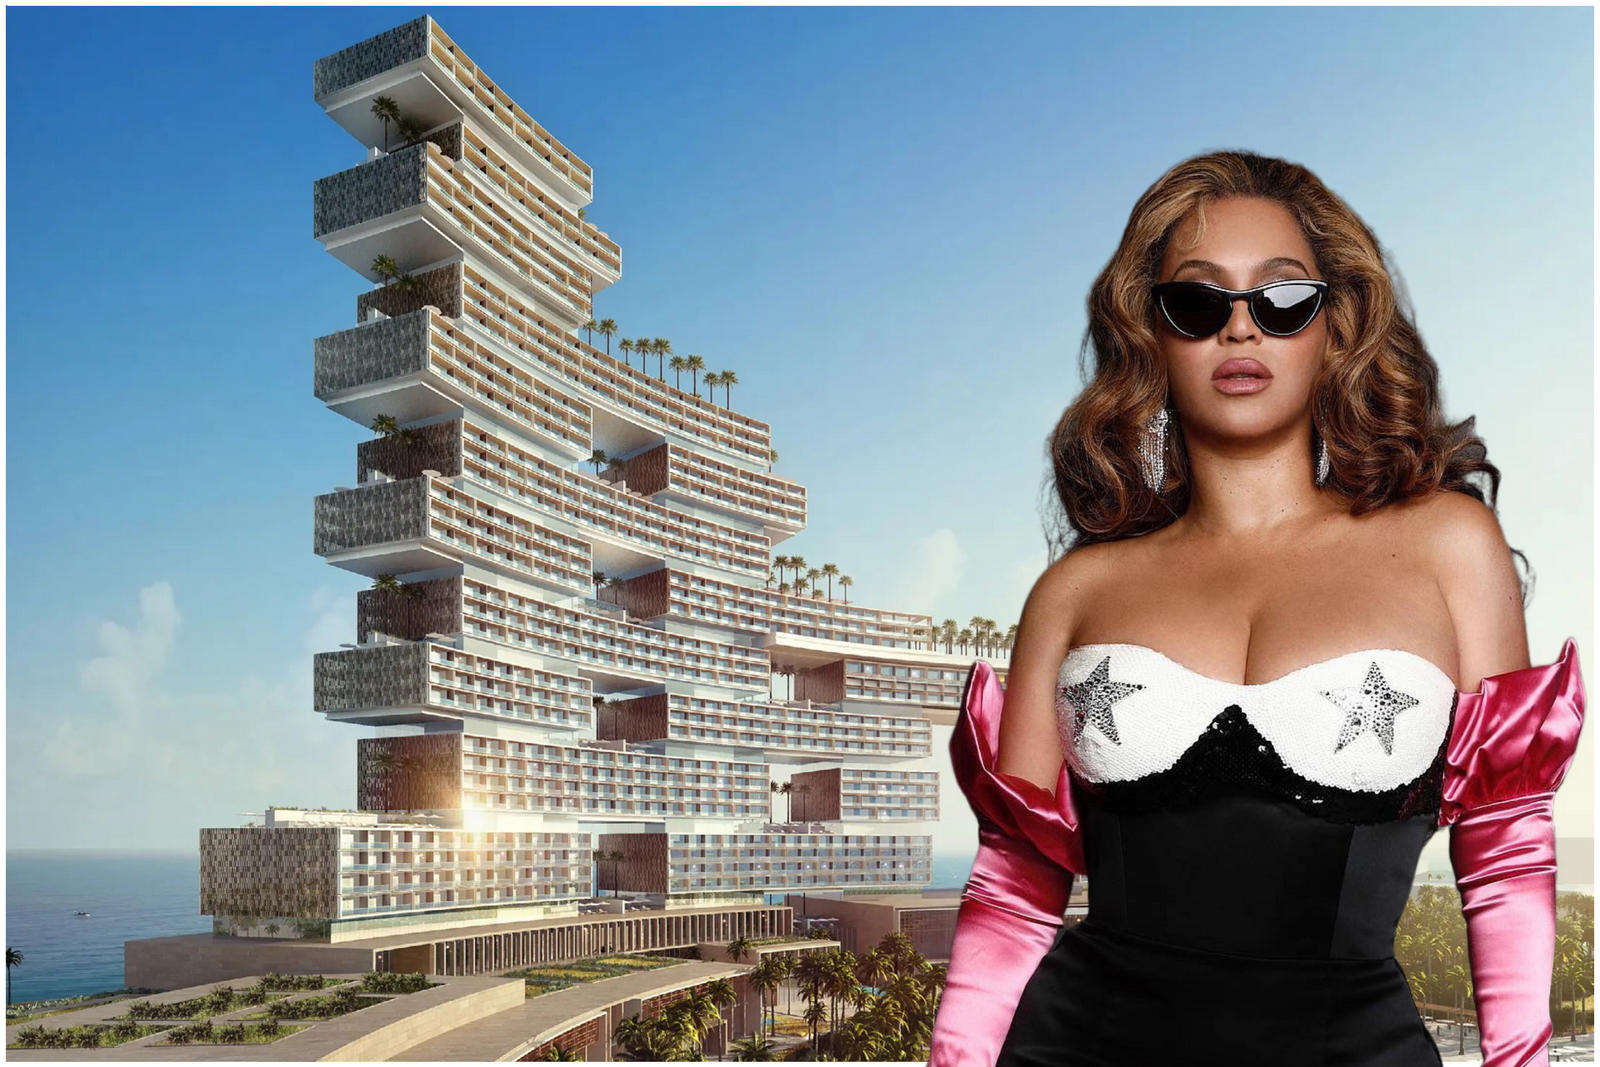 Beyoncé has charged 24 million to perform at the opening of Dubai's